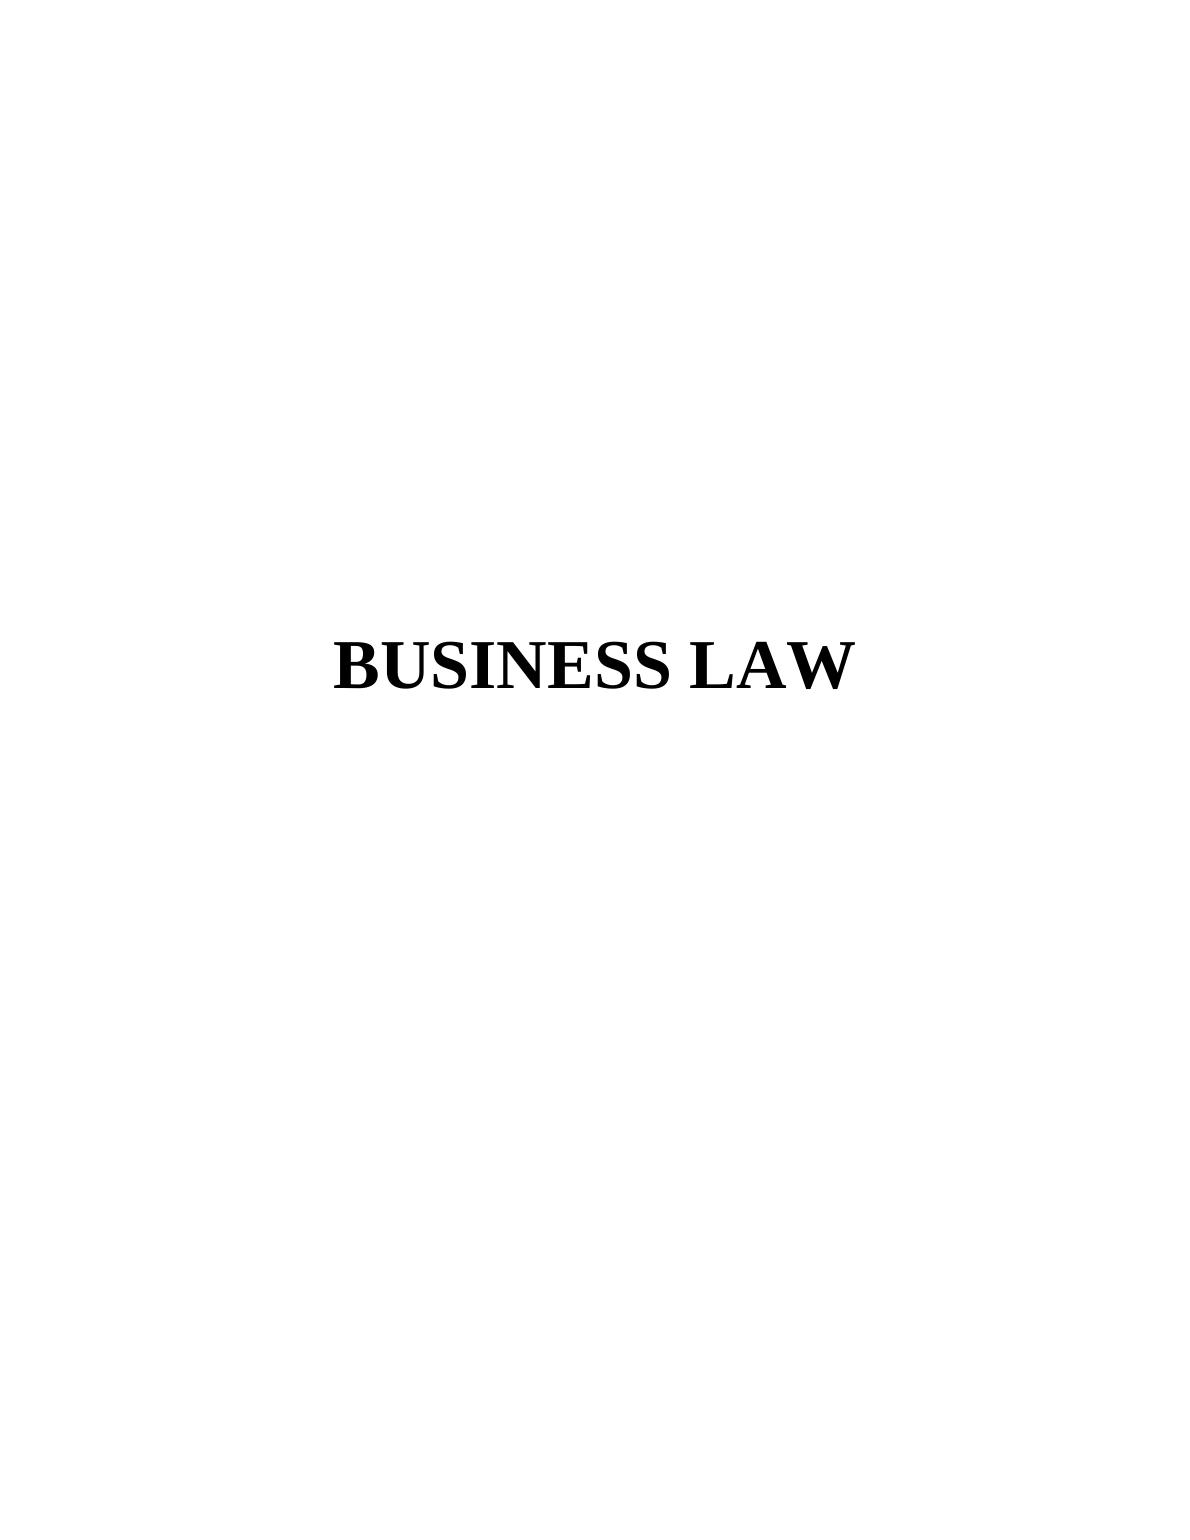 Report on Business Law_1